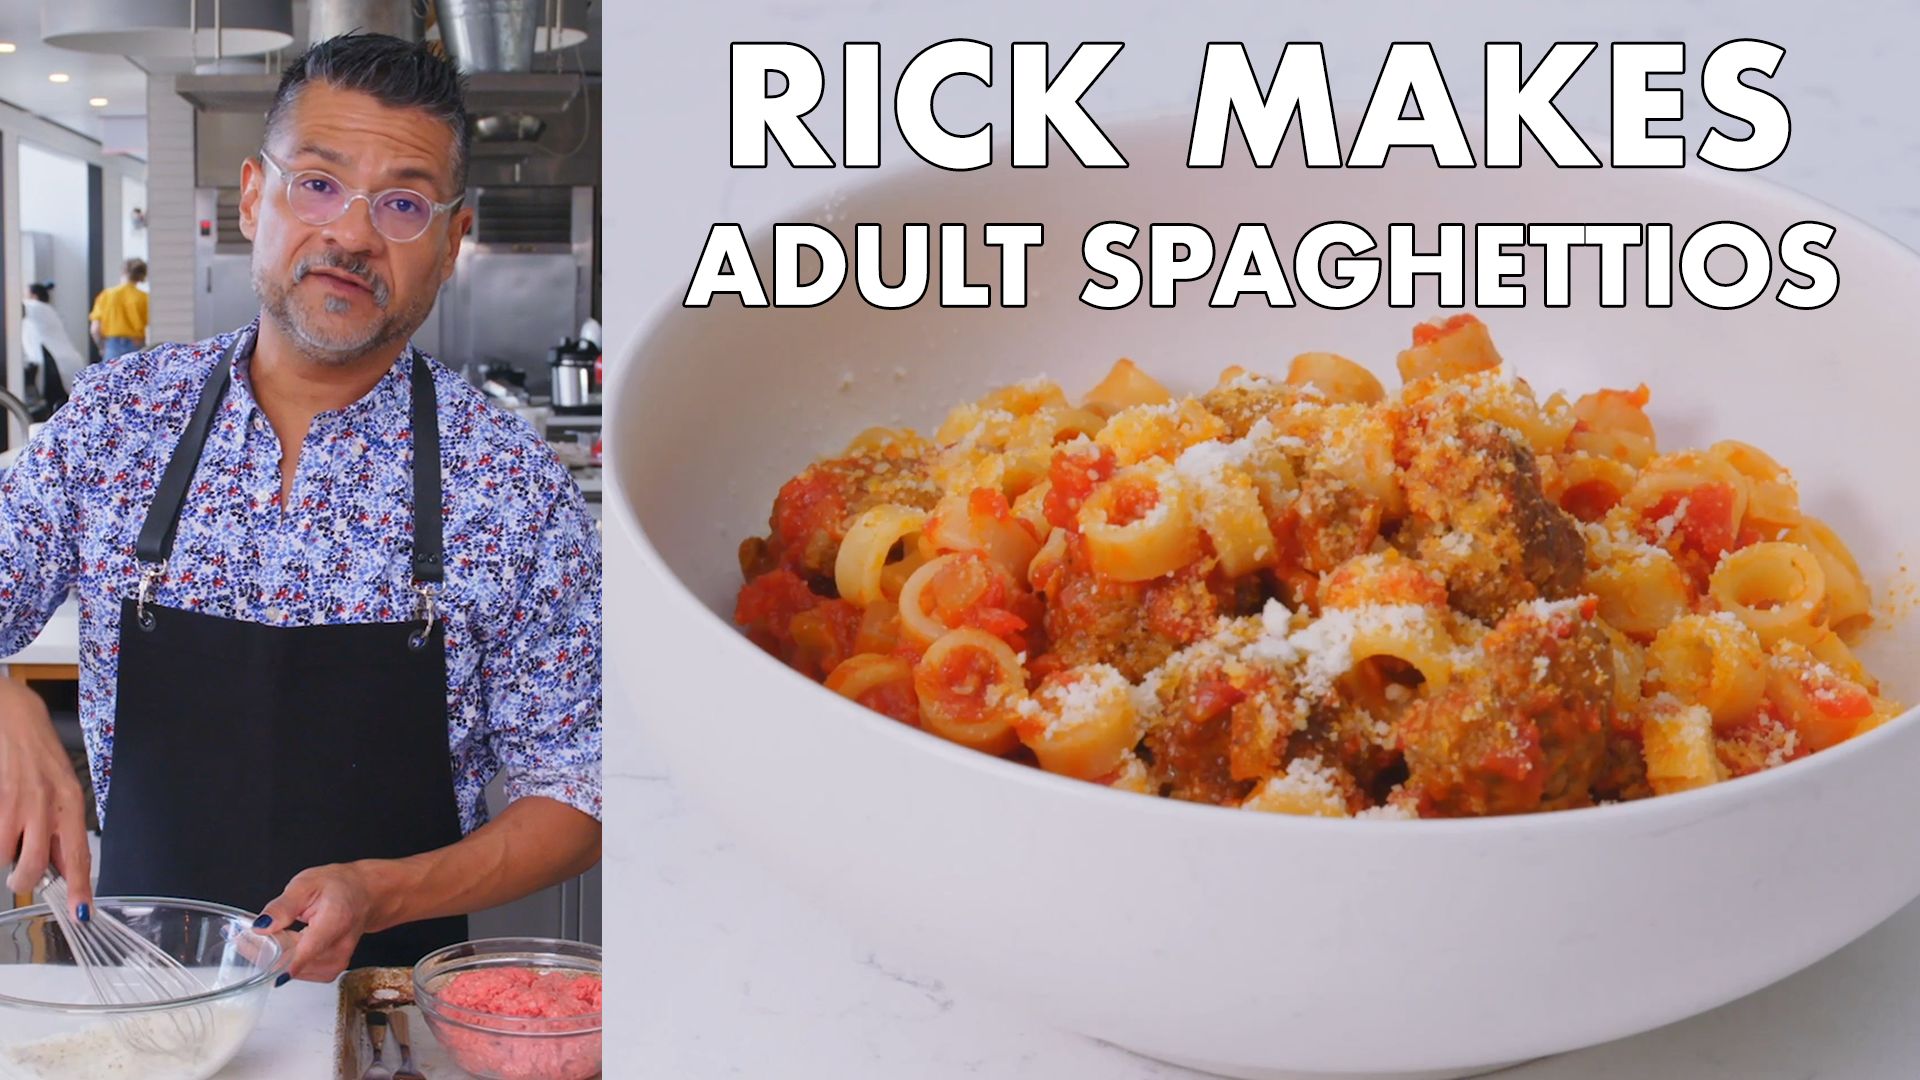 Watch Rick Makes Adult Spaghettios From The Test Kitchen Bon Appetit